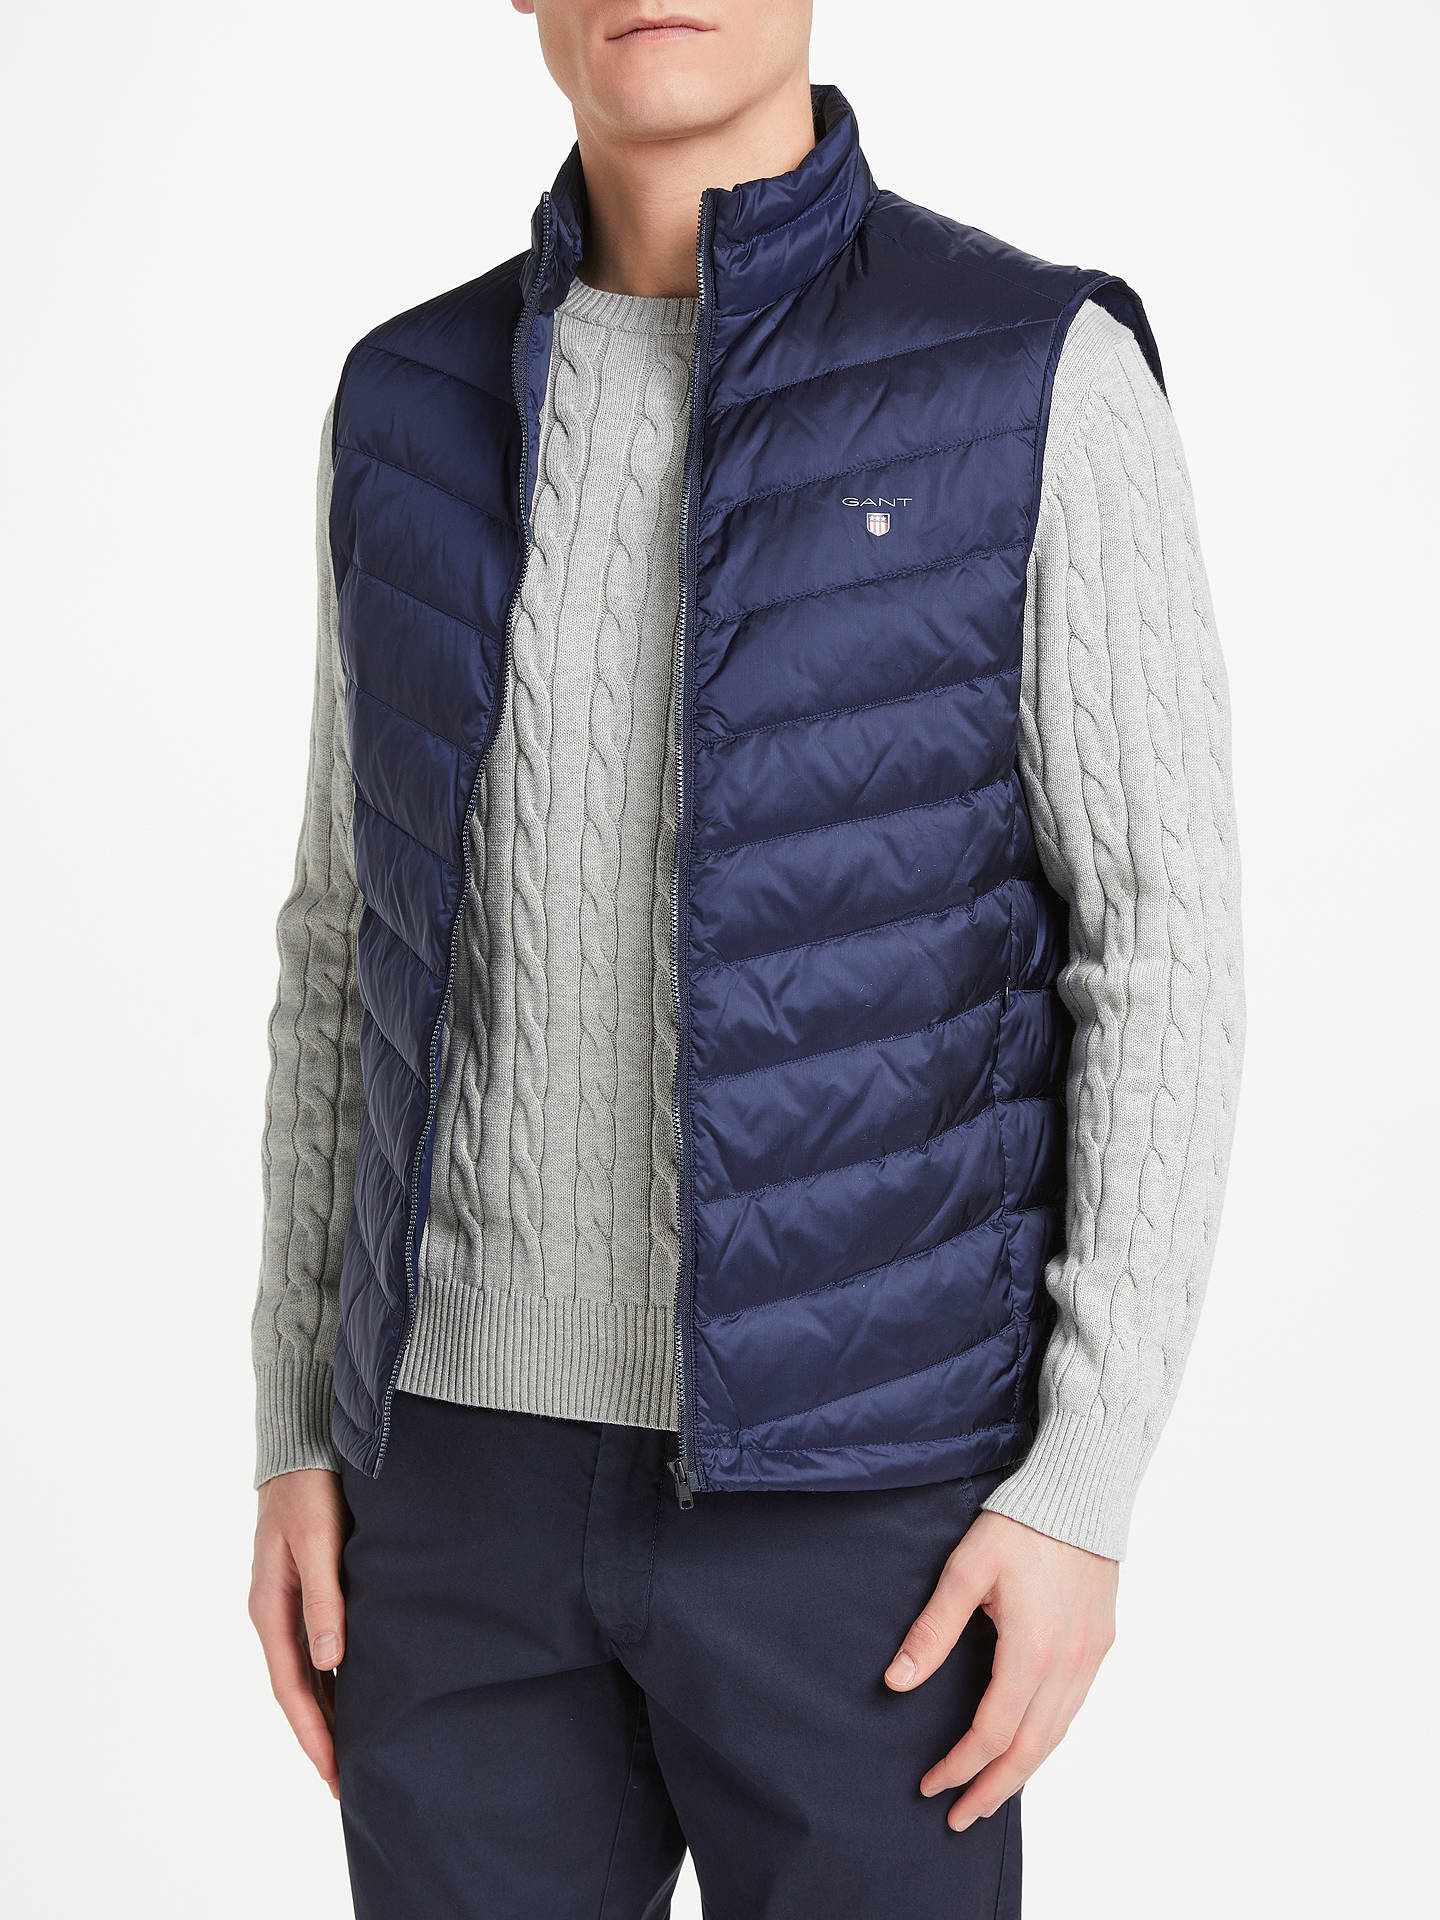 GANT Airie Quilted Down Gilet, Navy at John Lewis & Partners